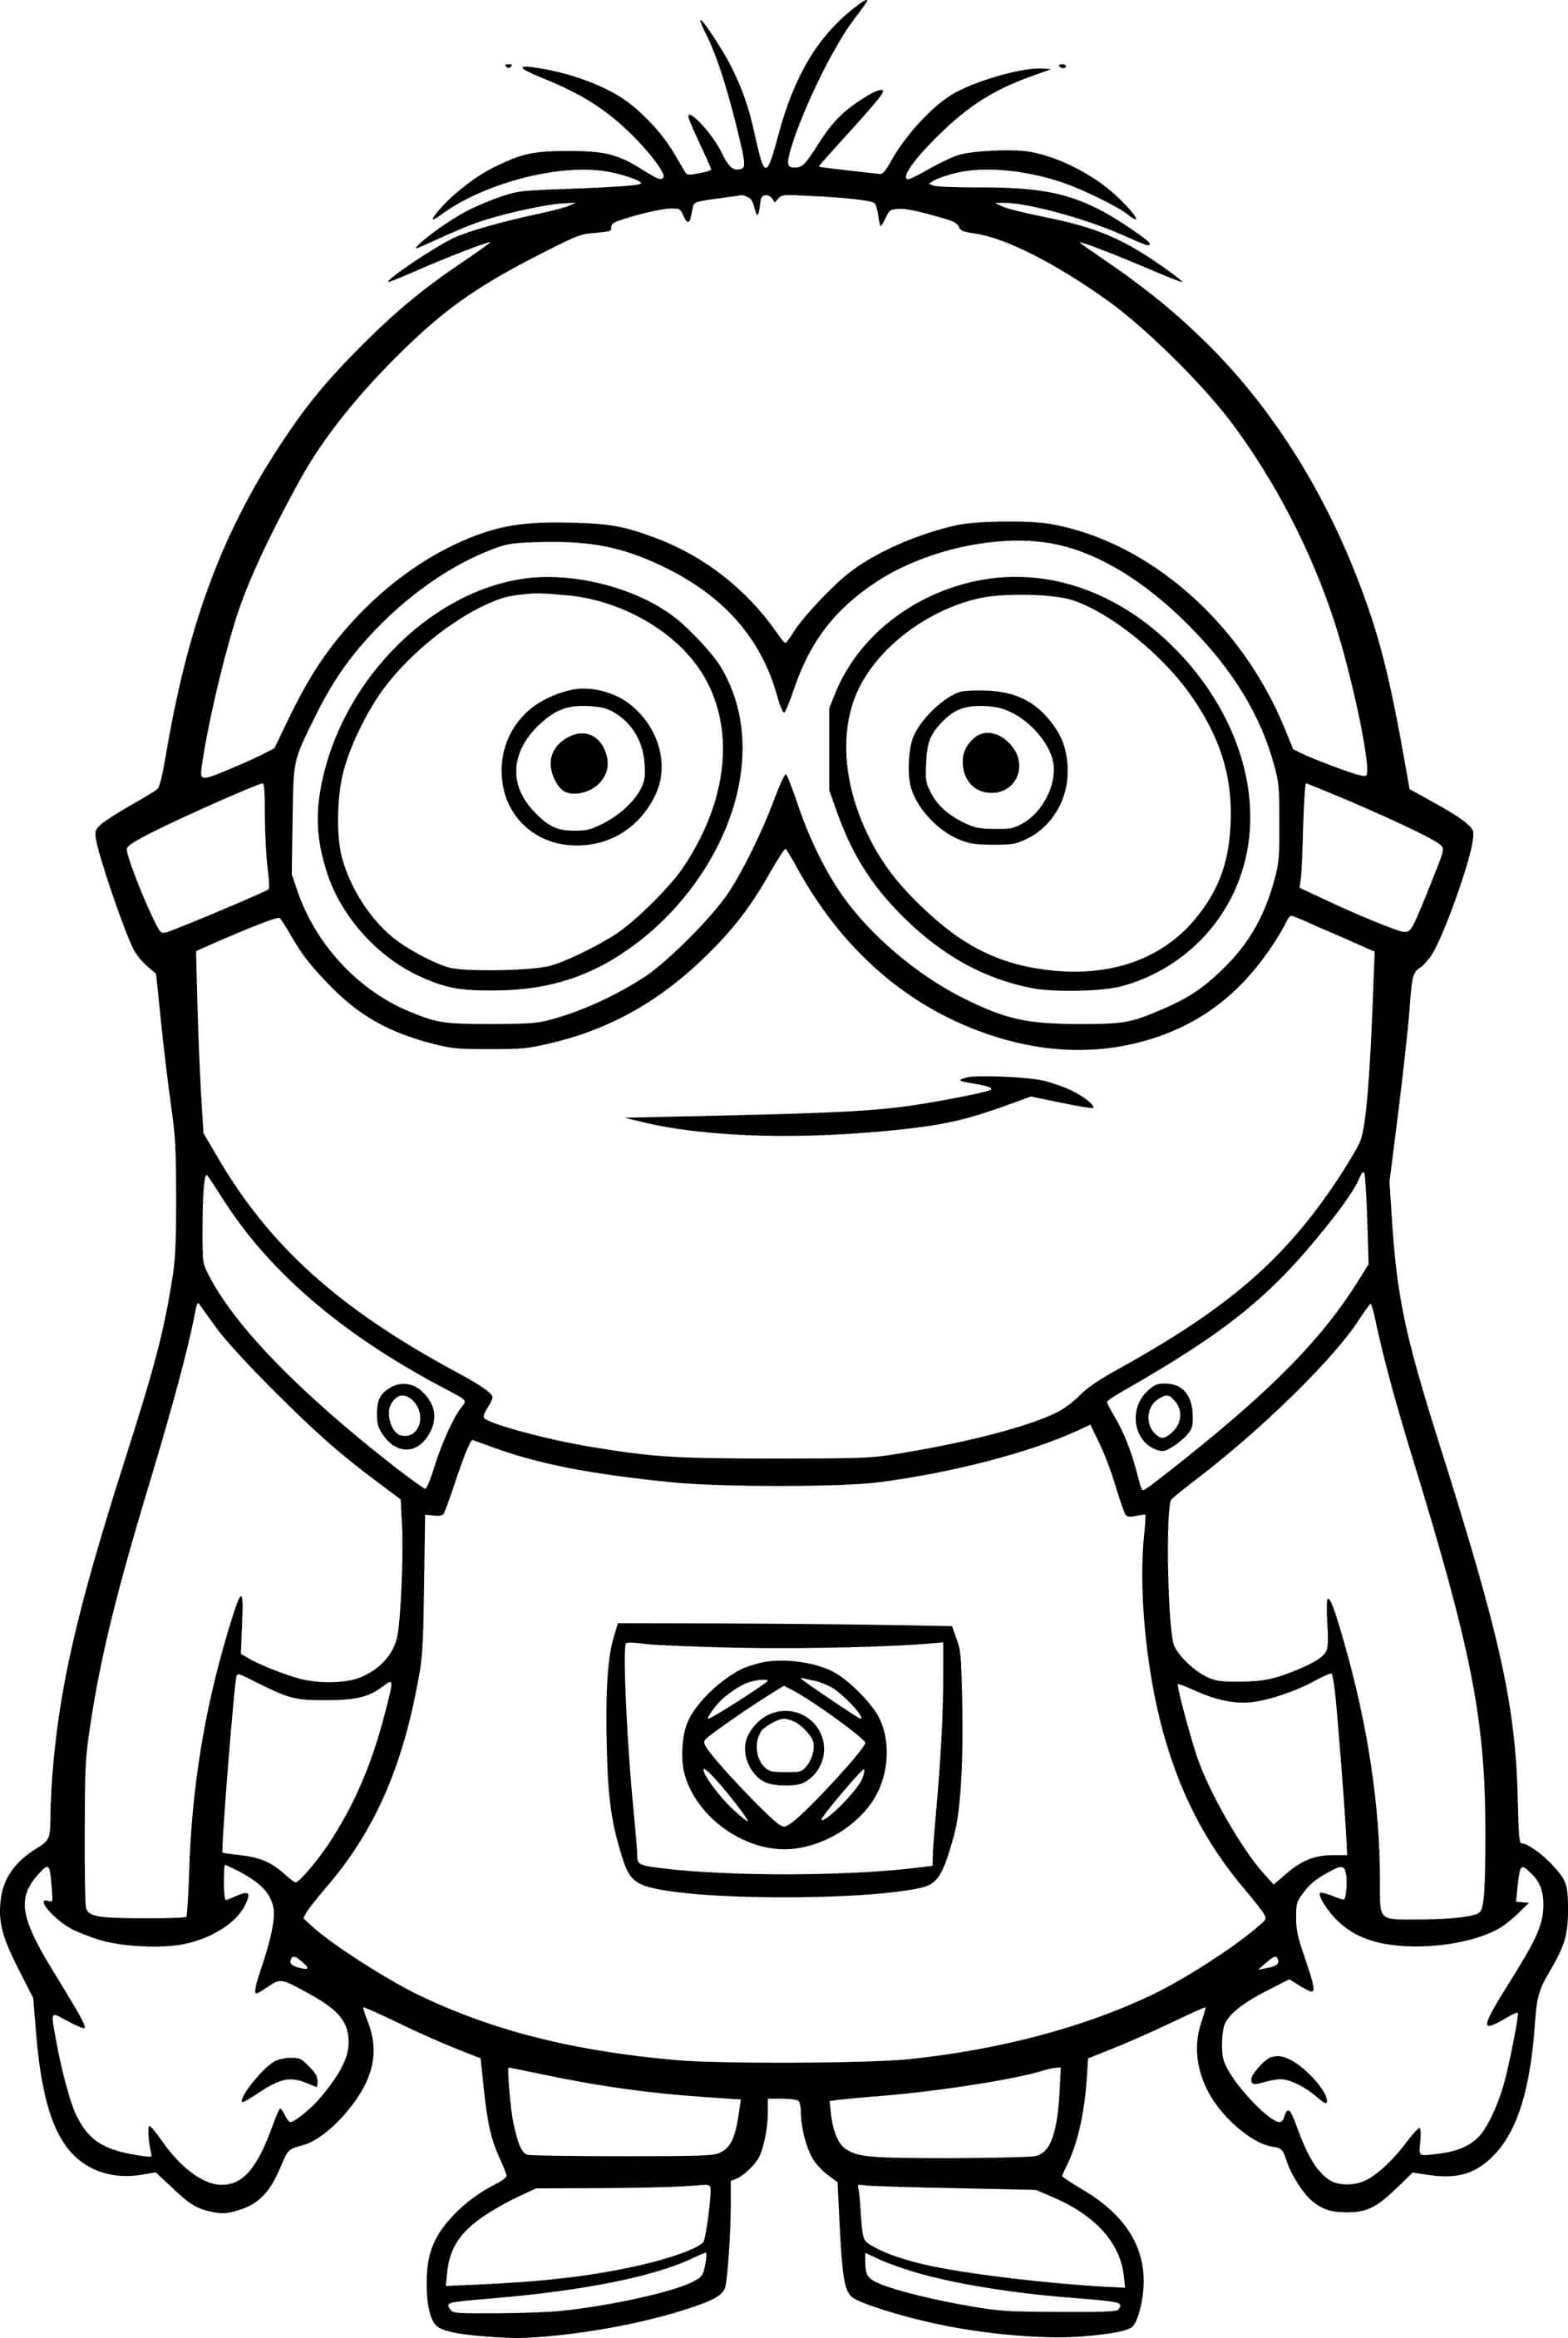 Little Minion Coloring Pages   Coloring Cool